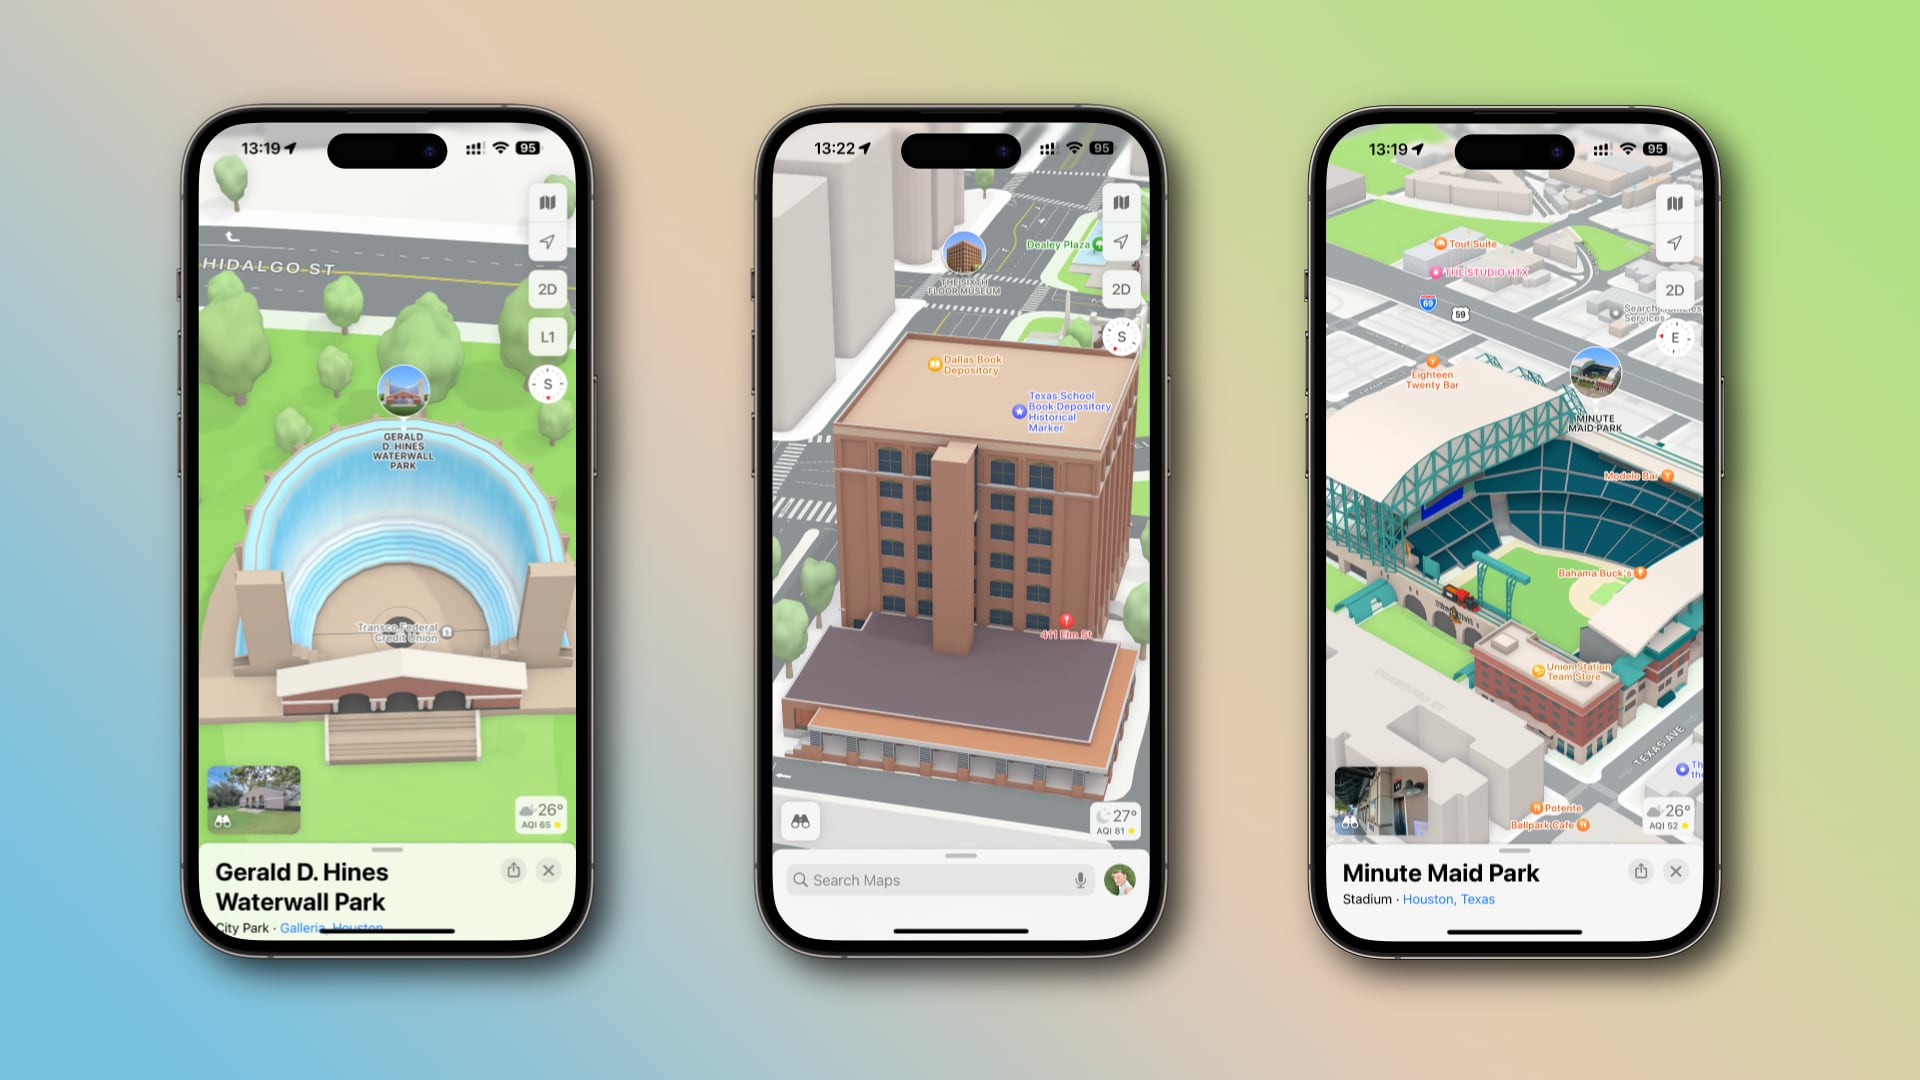 Apple Maps Look Around hits Dallas-Fort Worth; detailed 3D landmarks now available for Dallas and Houston areas